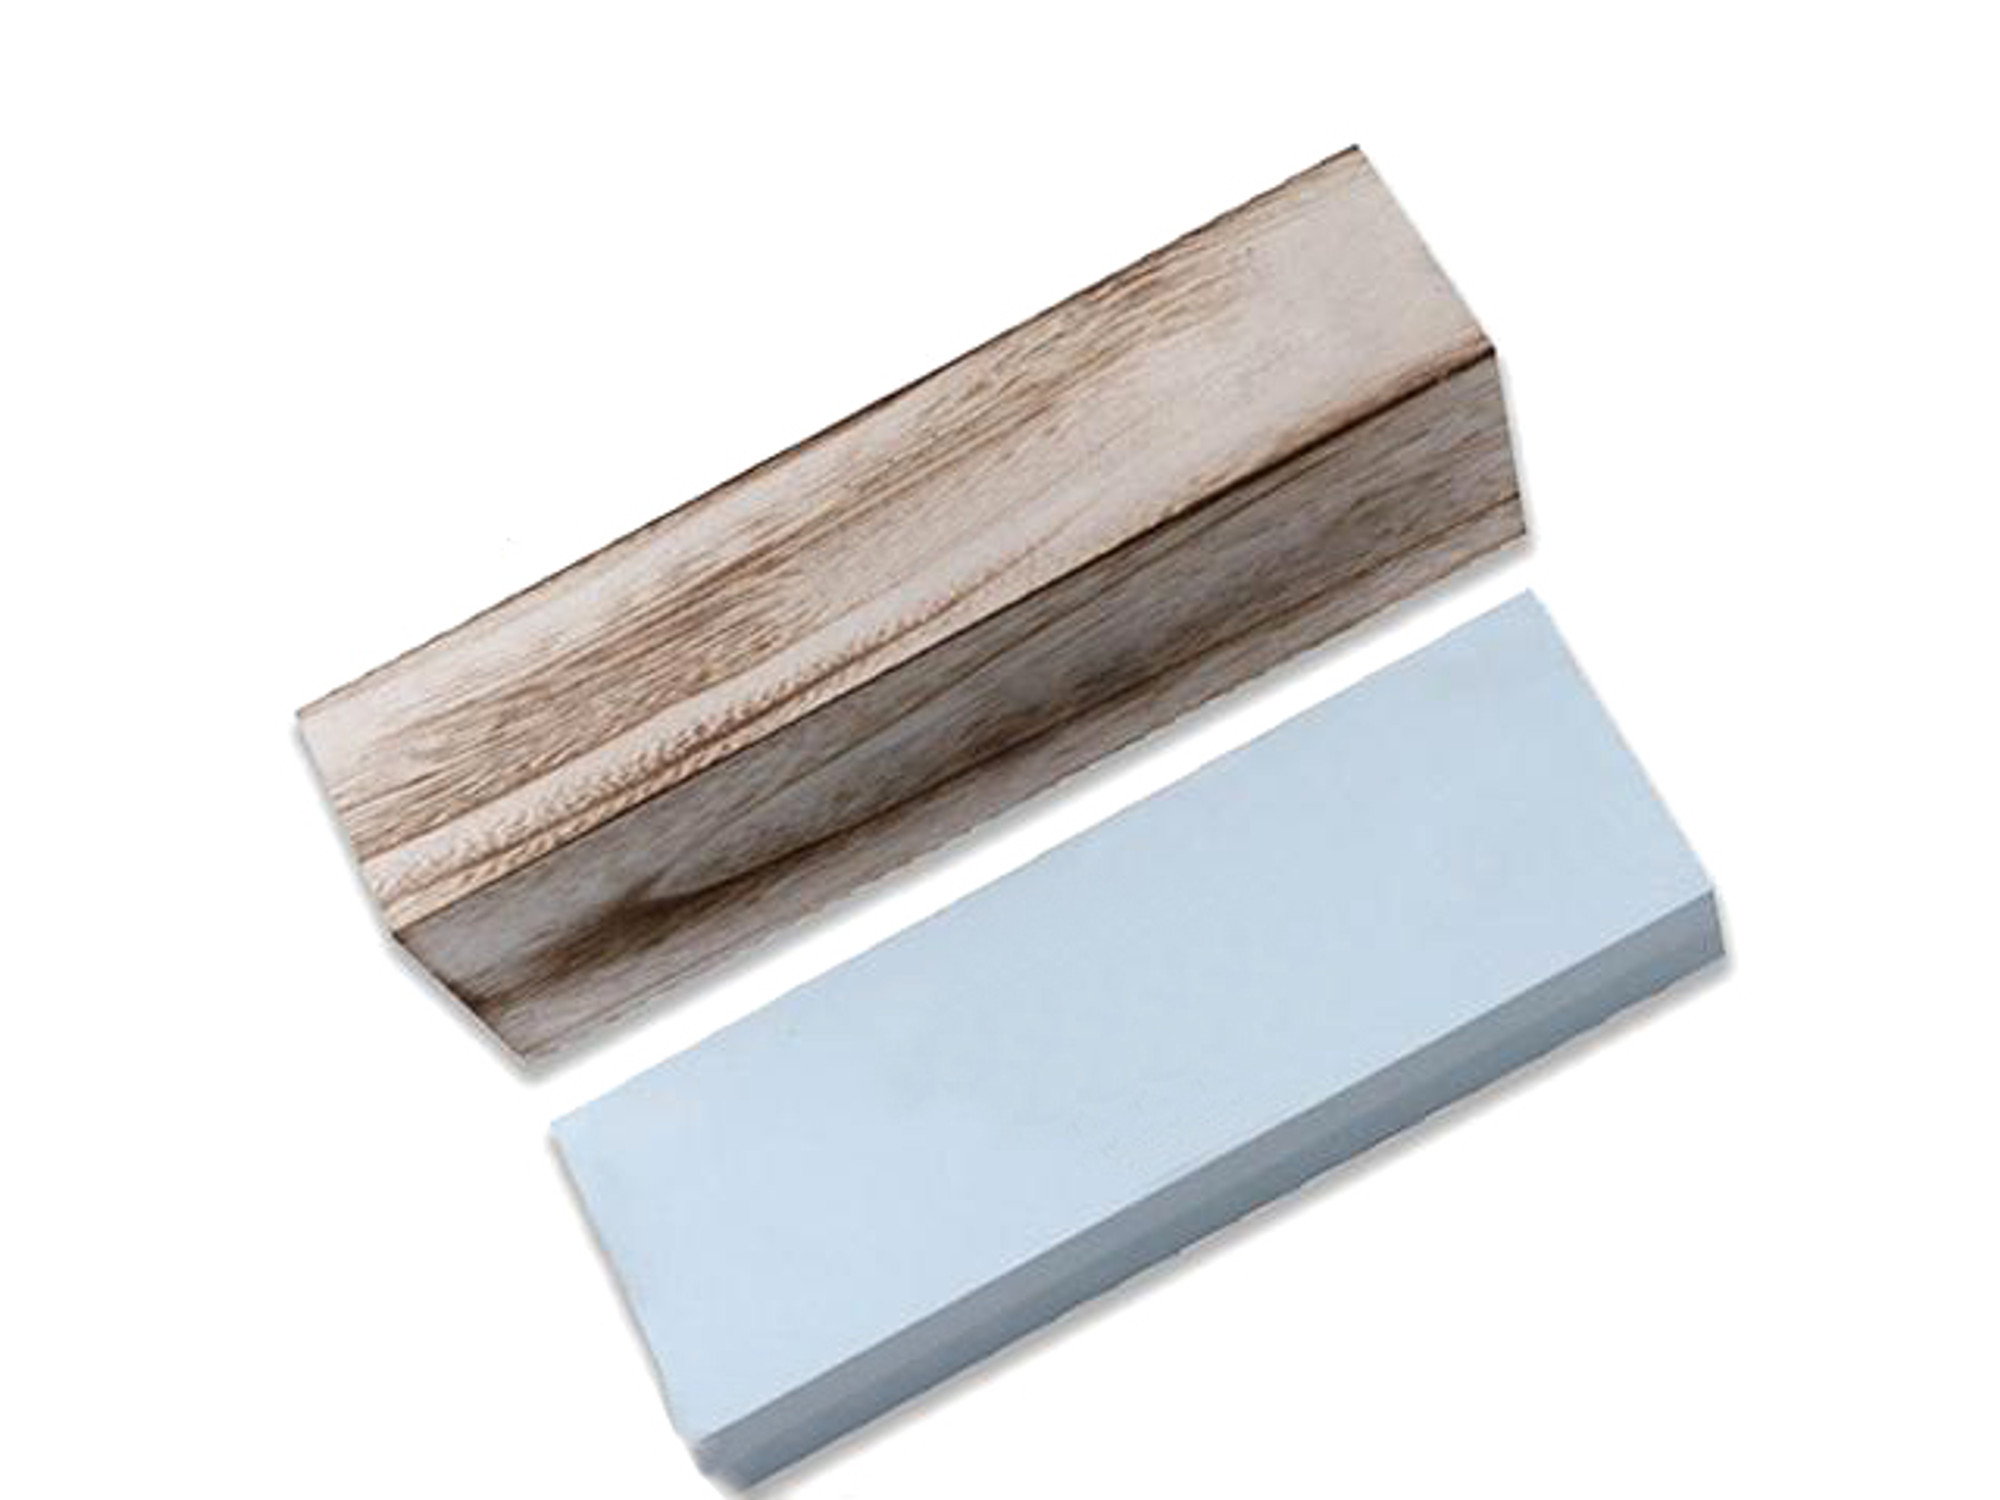 Master Cutlery Dual Sided Sharpening Stone - #600/#1000 Dual Grit